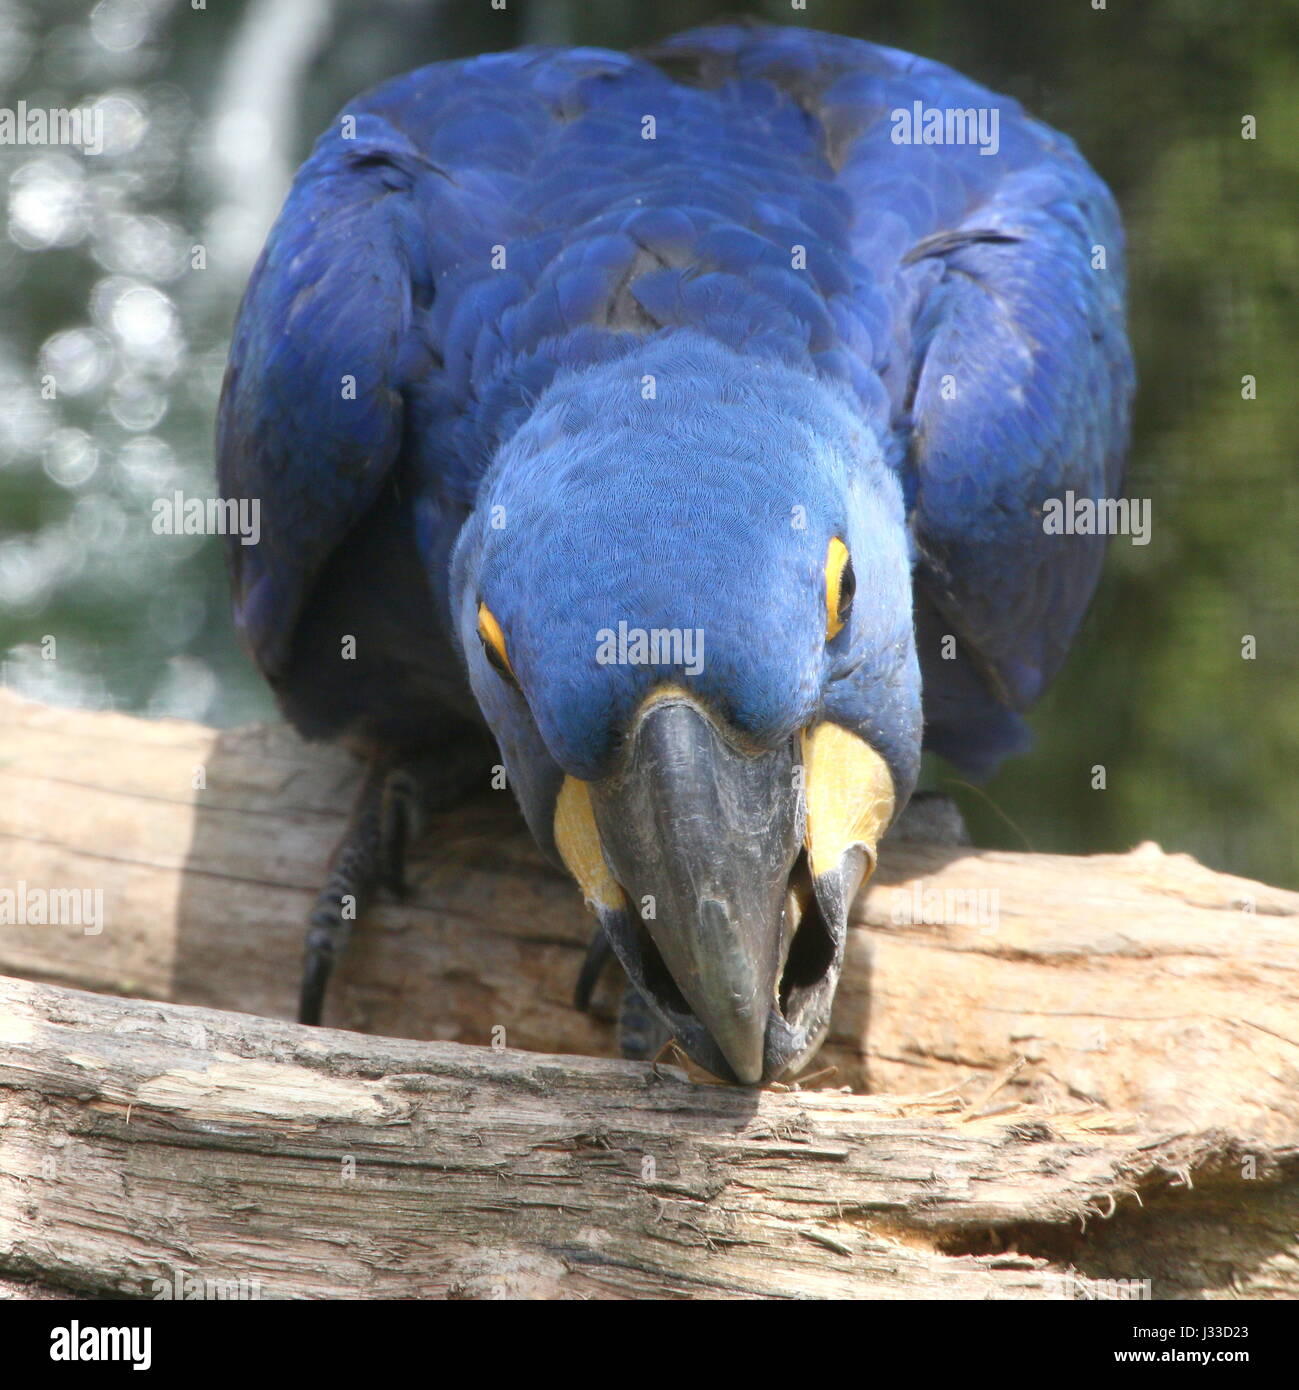 South American Hyacinth Macaw (Anodorhynchus hyacinthinus). Largest parrot species in the world, found in Brazil, Bolivia and Paraguay. Stock Photo